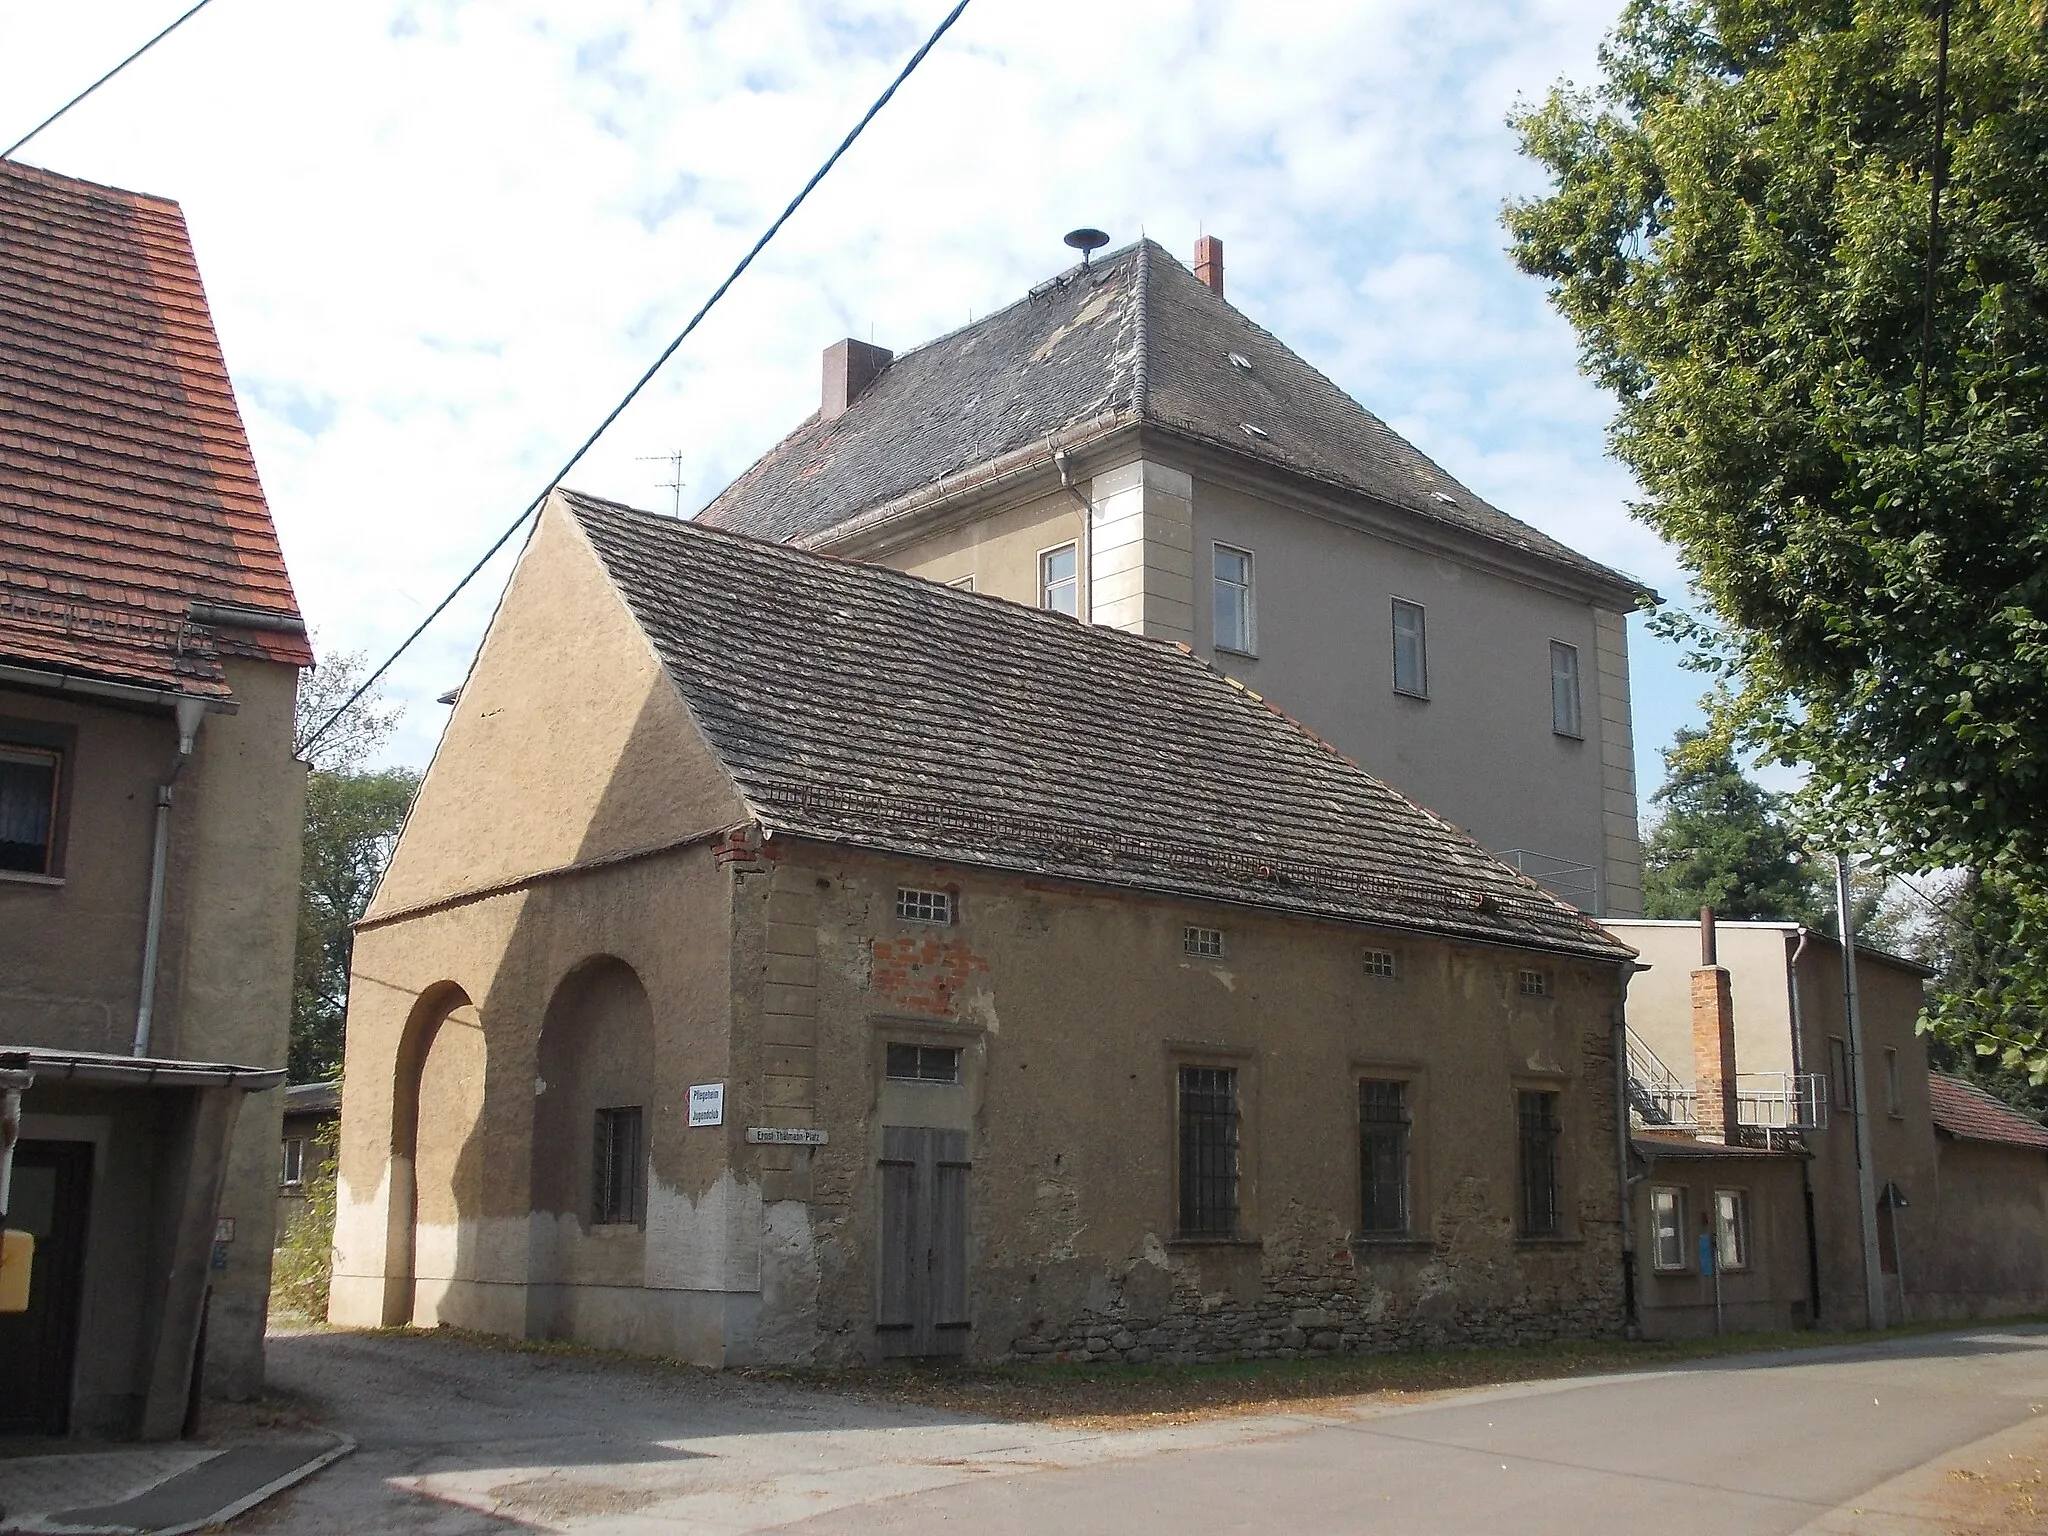 Photo showing: Manor house in Lumpzig (district of Altenburger Land, Thuringia)